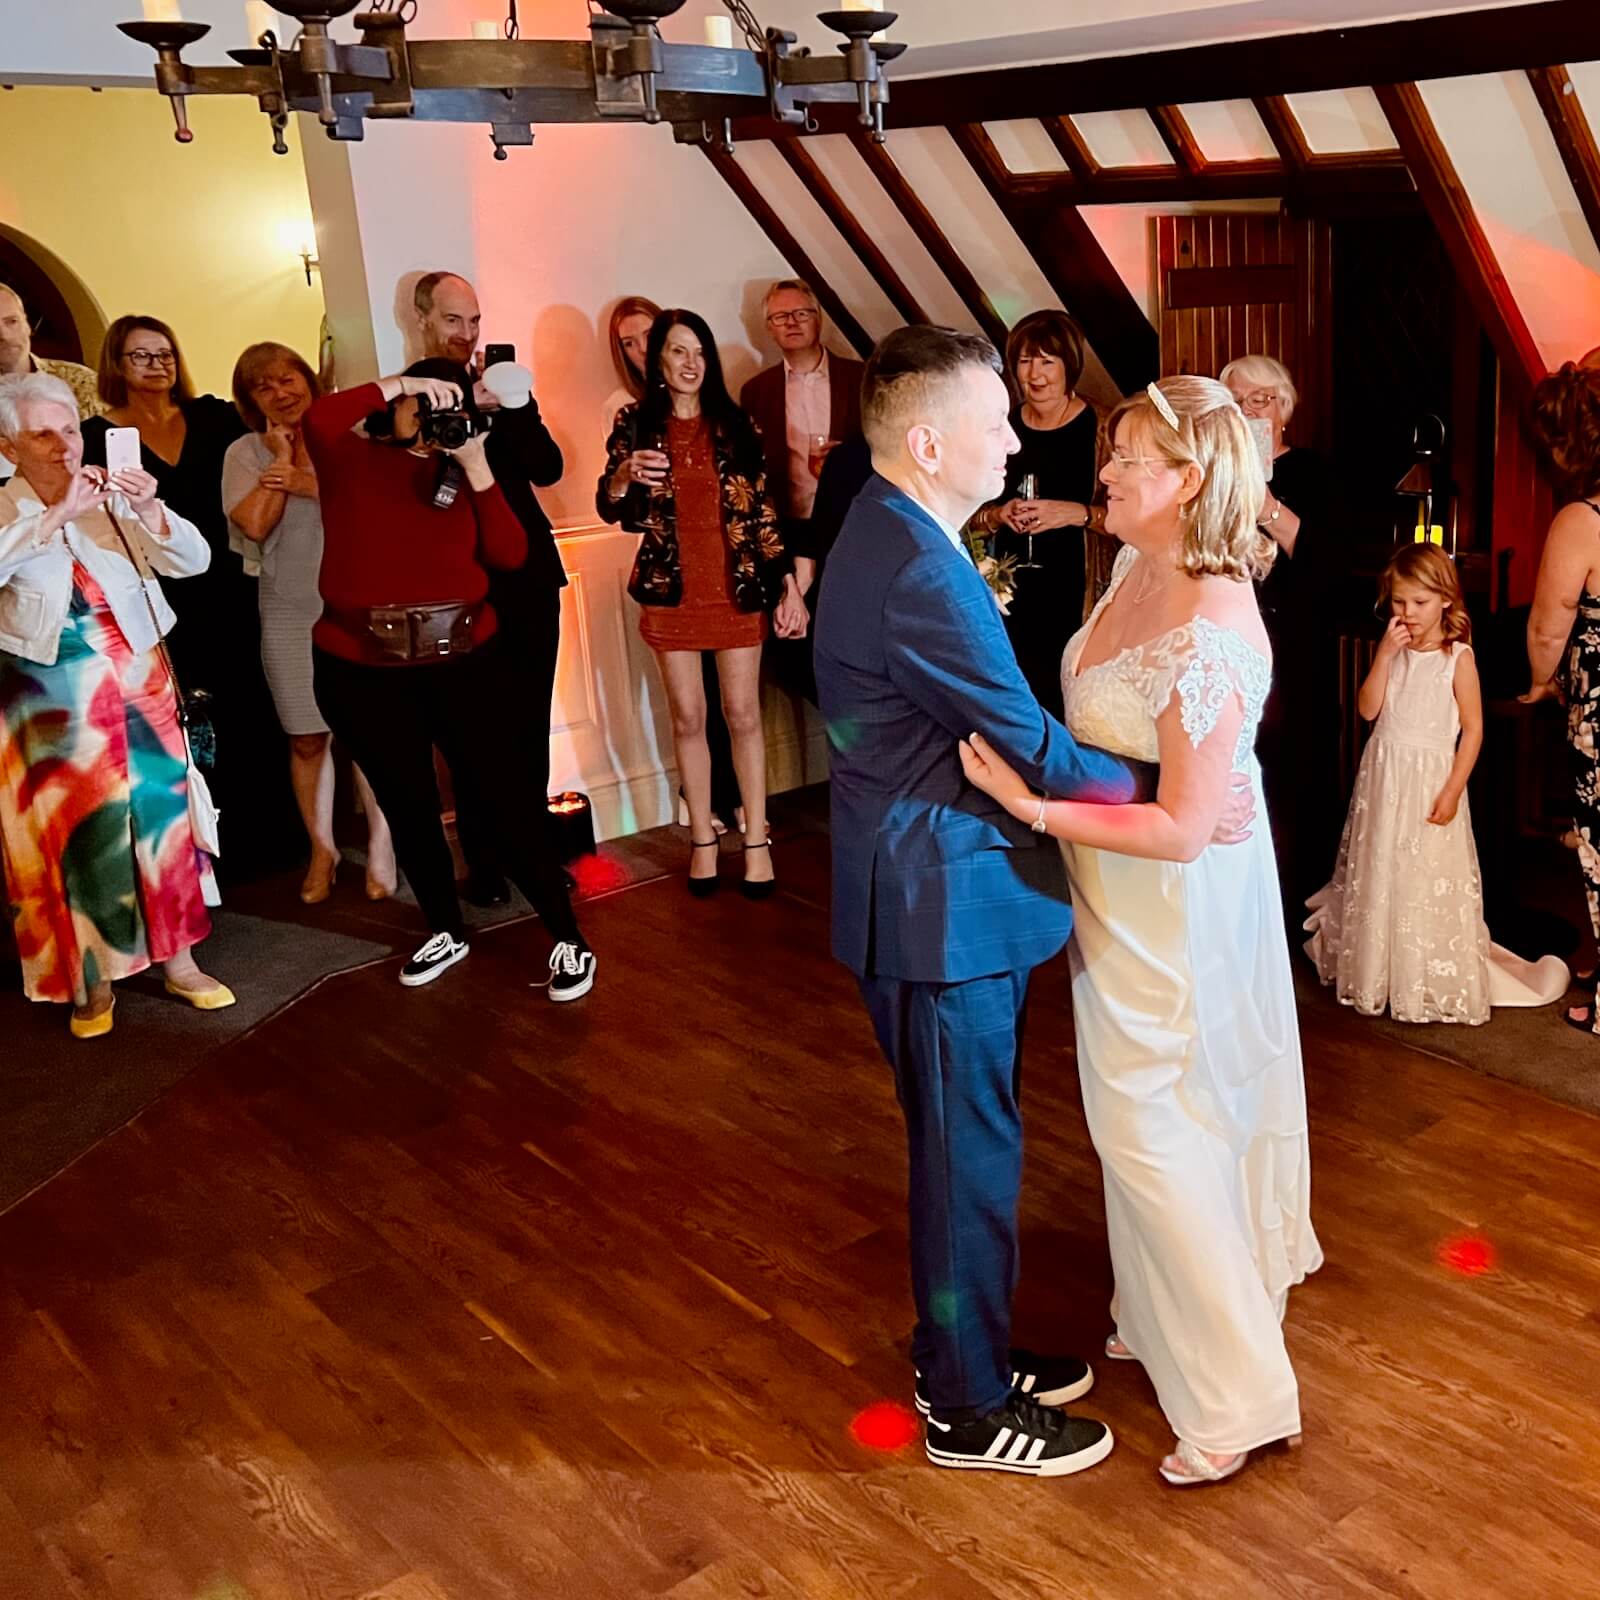 Pam and Mark's first dance